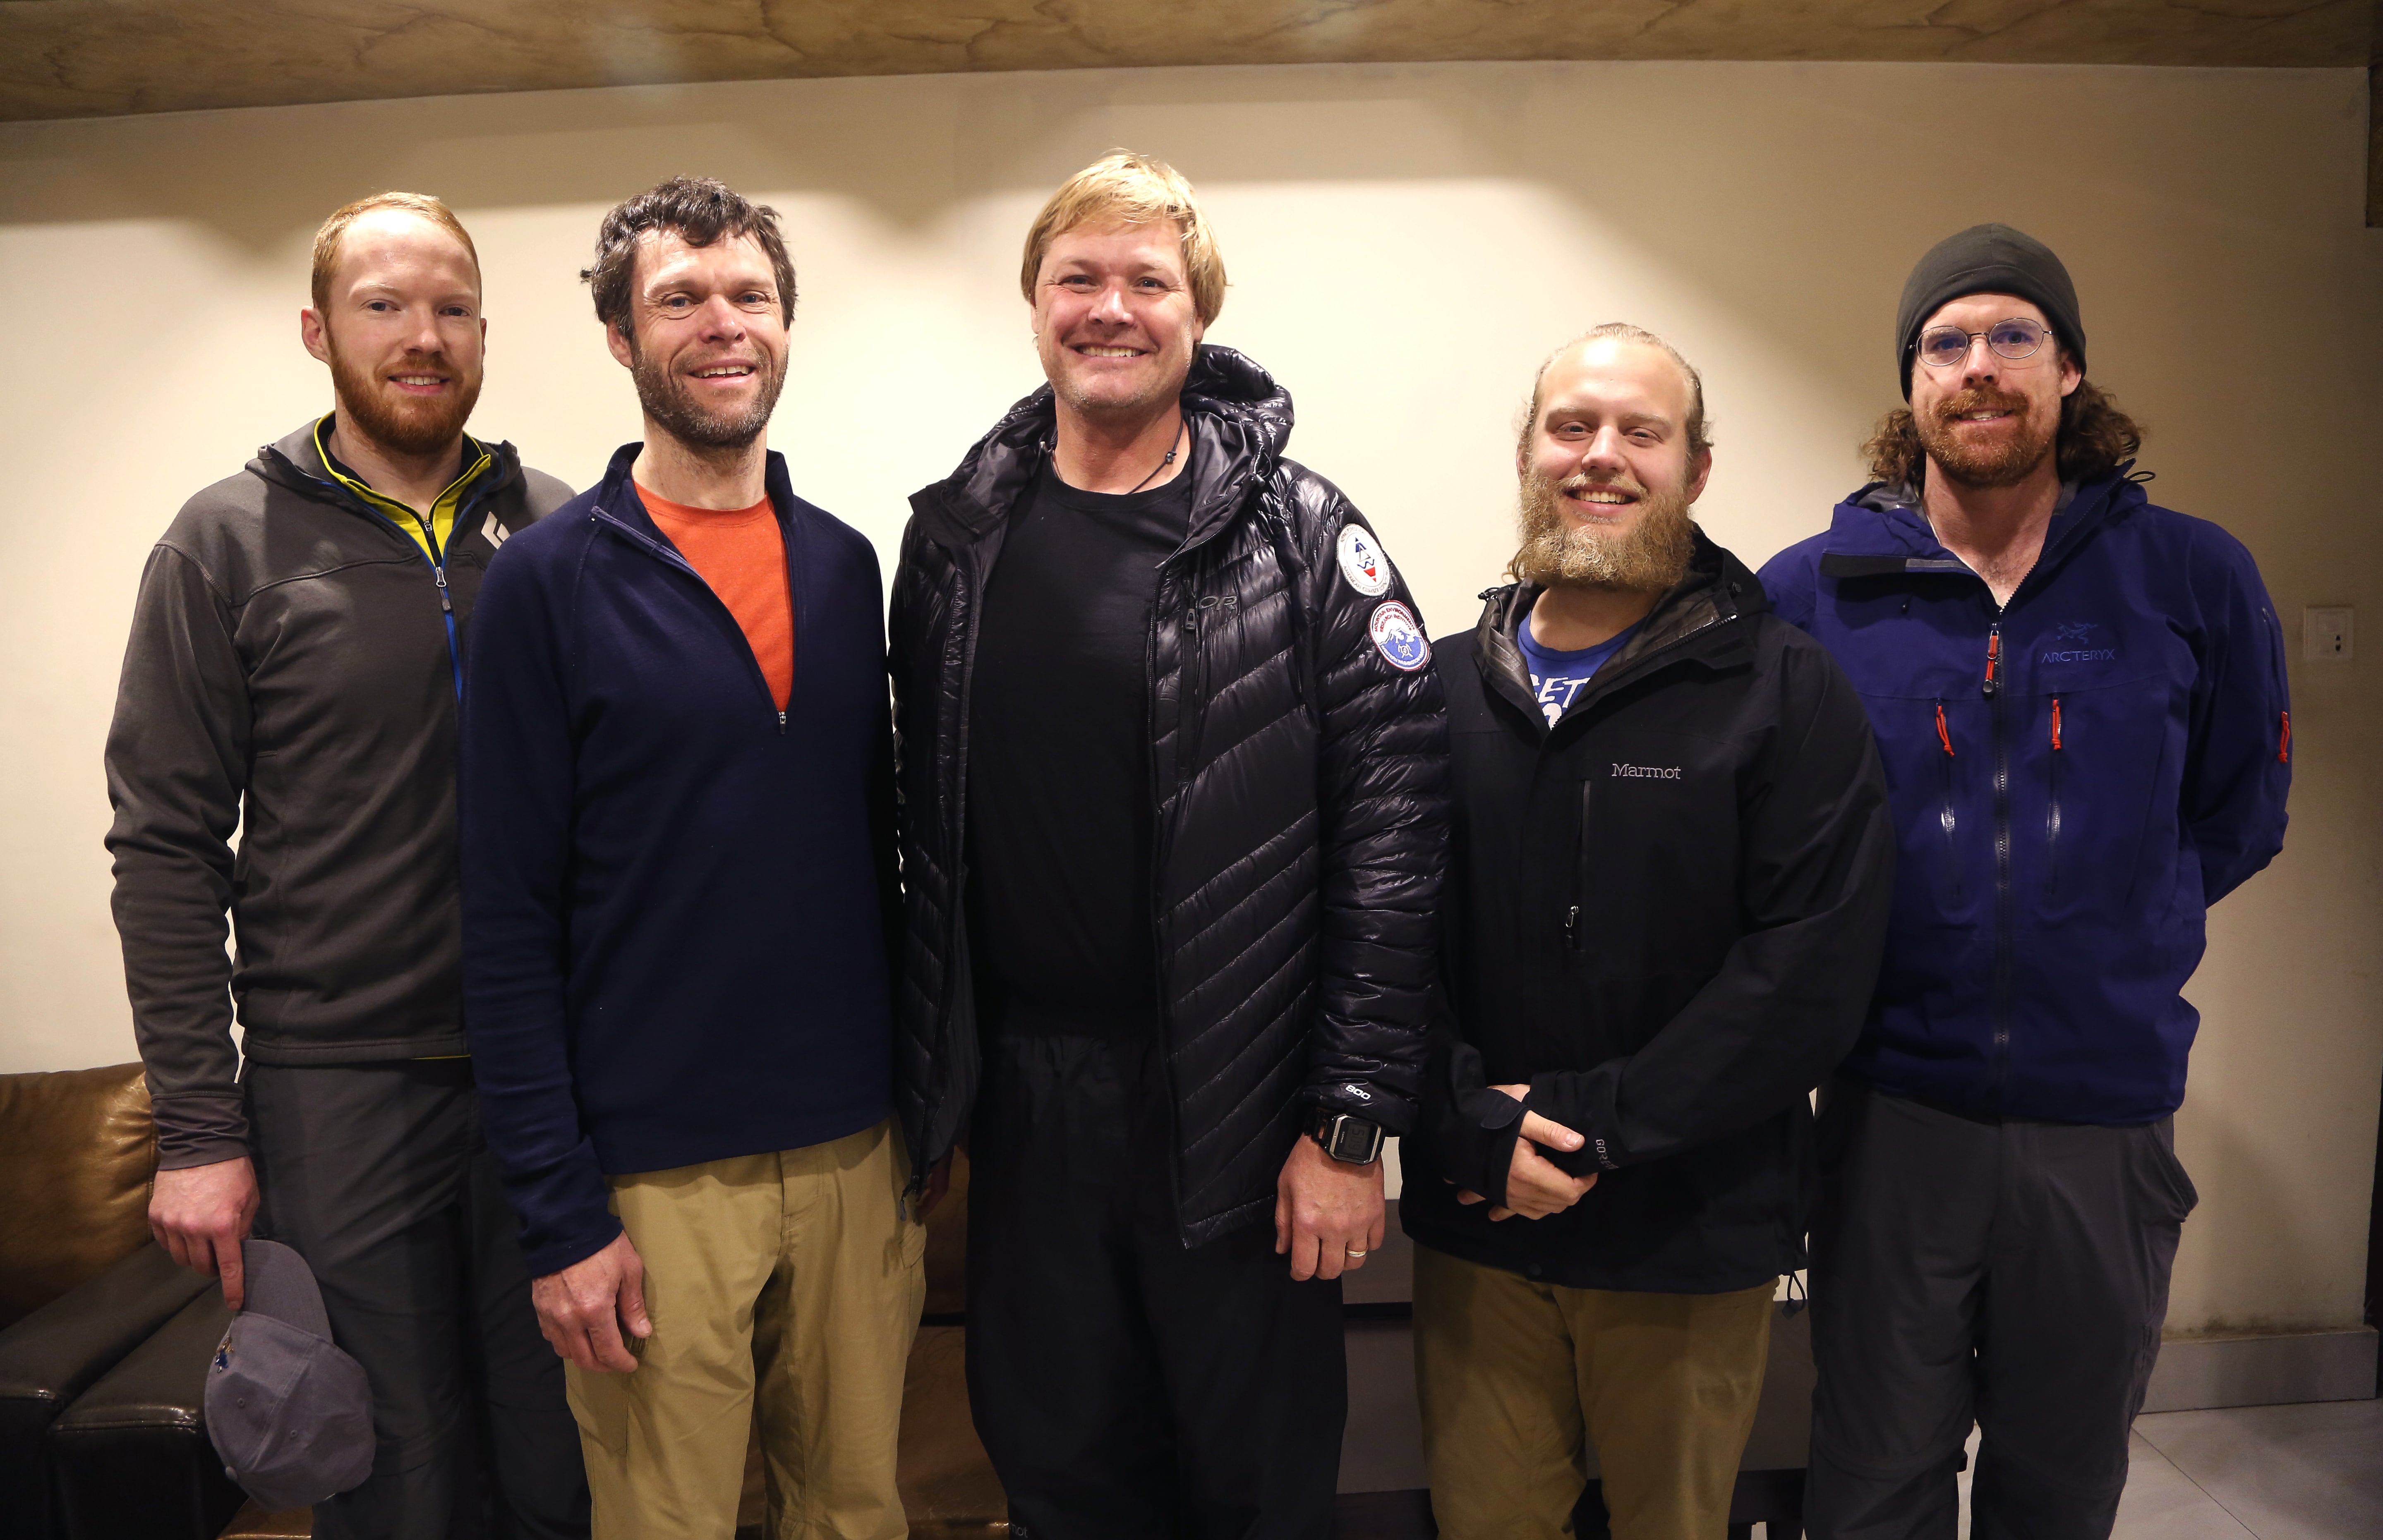 Professor John All, center, of Western Washington University, and his team pose for the photograph at a hotel before leaving for Everest region, in Kathmandu, Nepal, Wednesday, March 27, 2019. A team of American scientists is heading to the Mount Everest region to study how pollution has impacted the Himalayas and glaciers that are melting due to global warming.